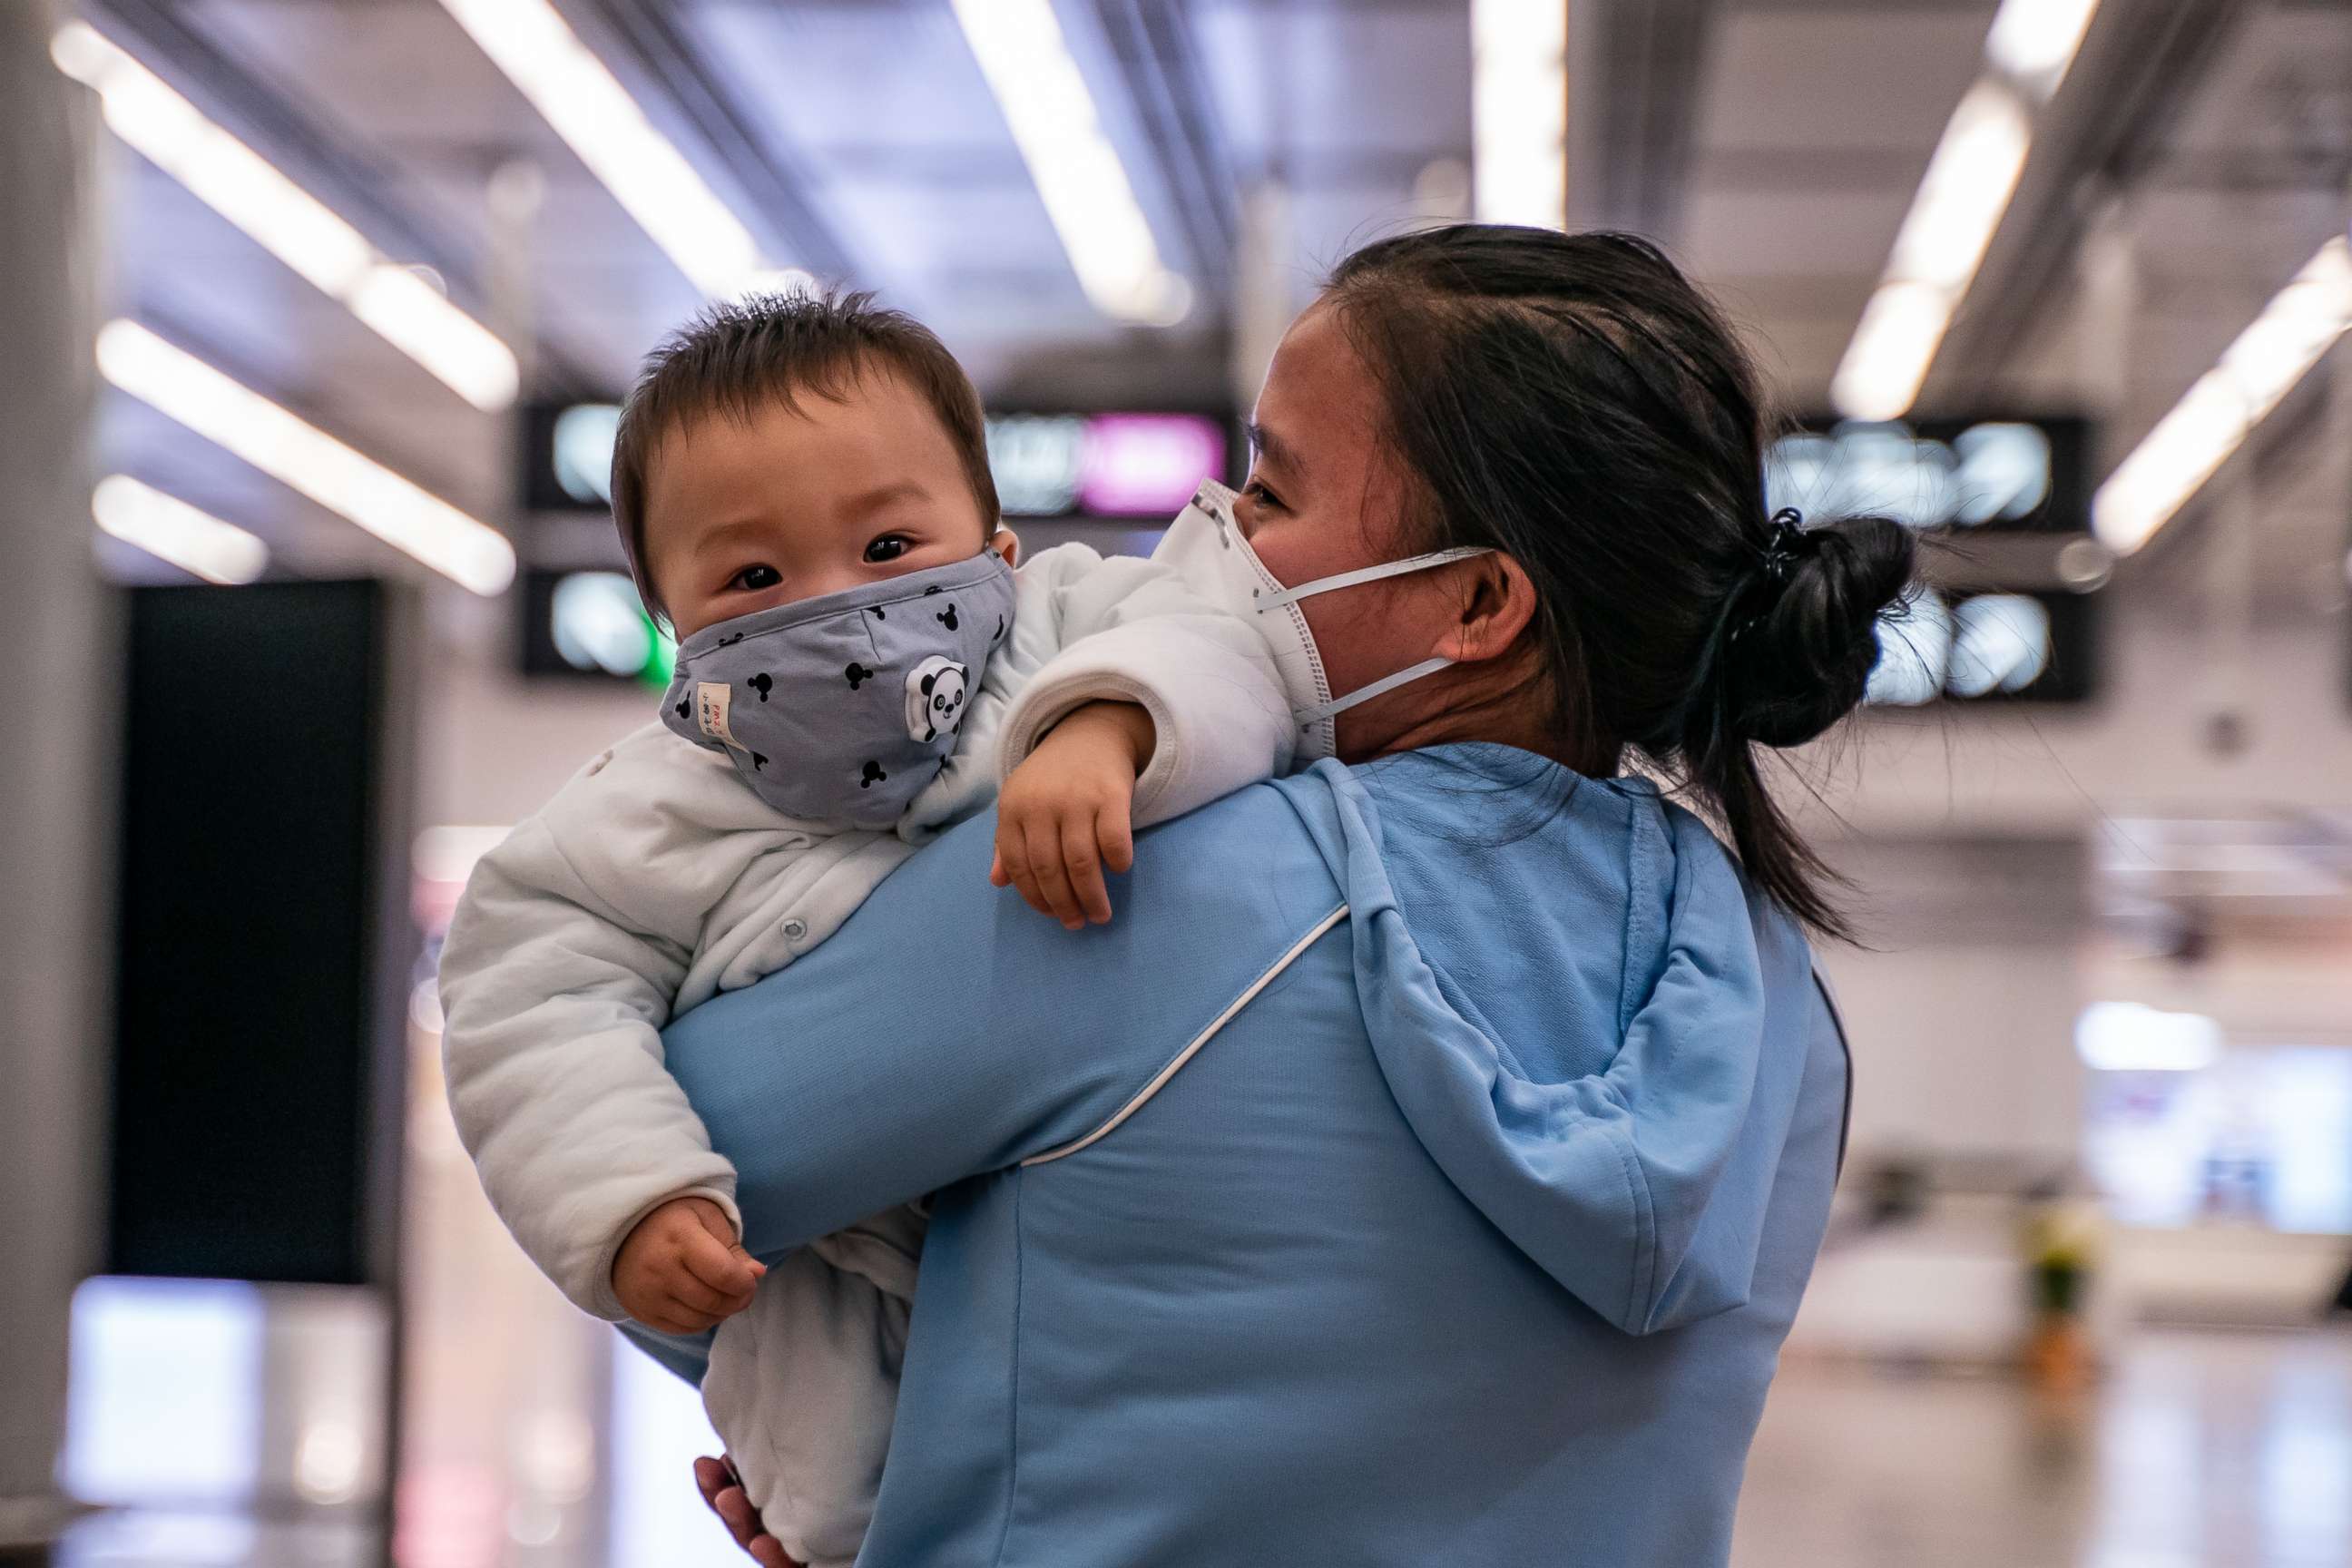 PHOTO: A woman carries a baby wearing a protective mask as they exit the arrival hall at Hong Kong High Speed Rail Station on Jan. 29, 2020.